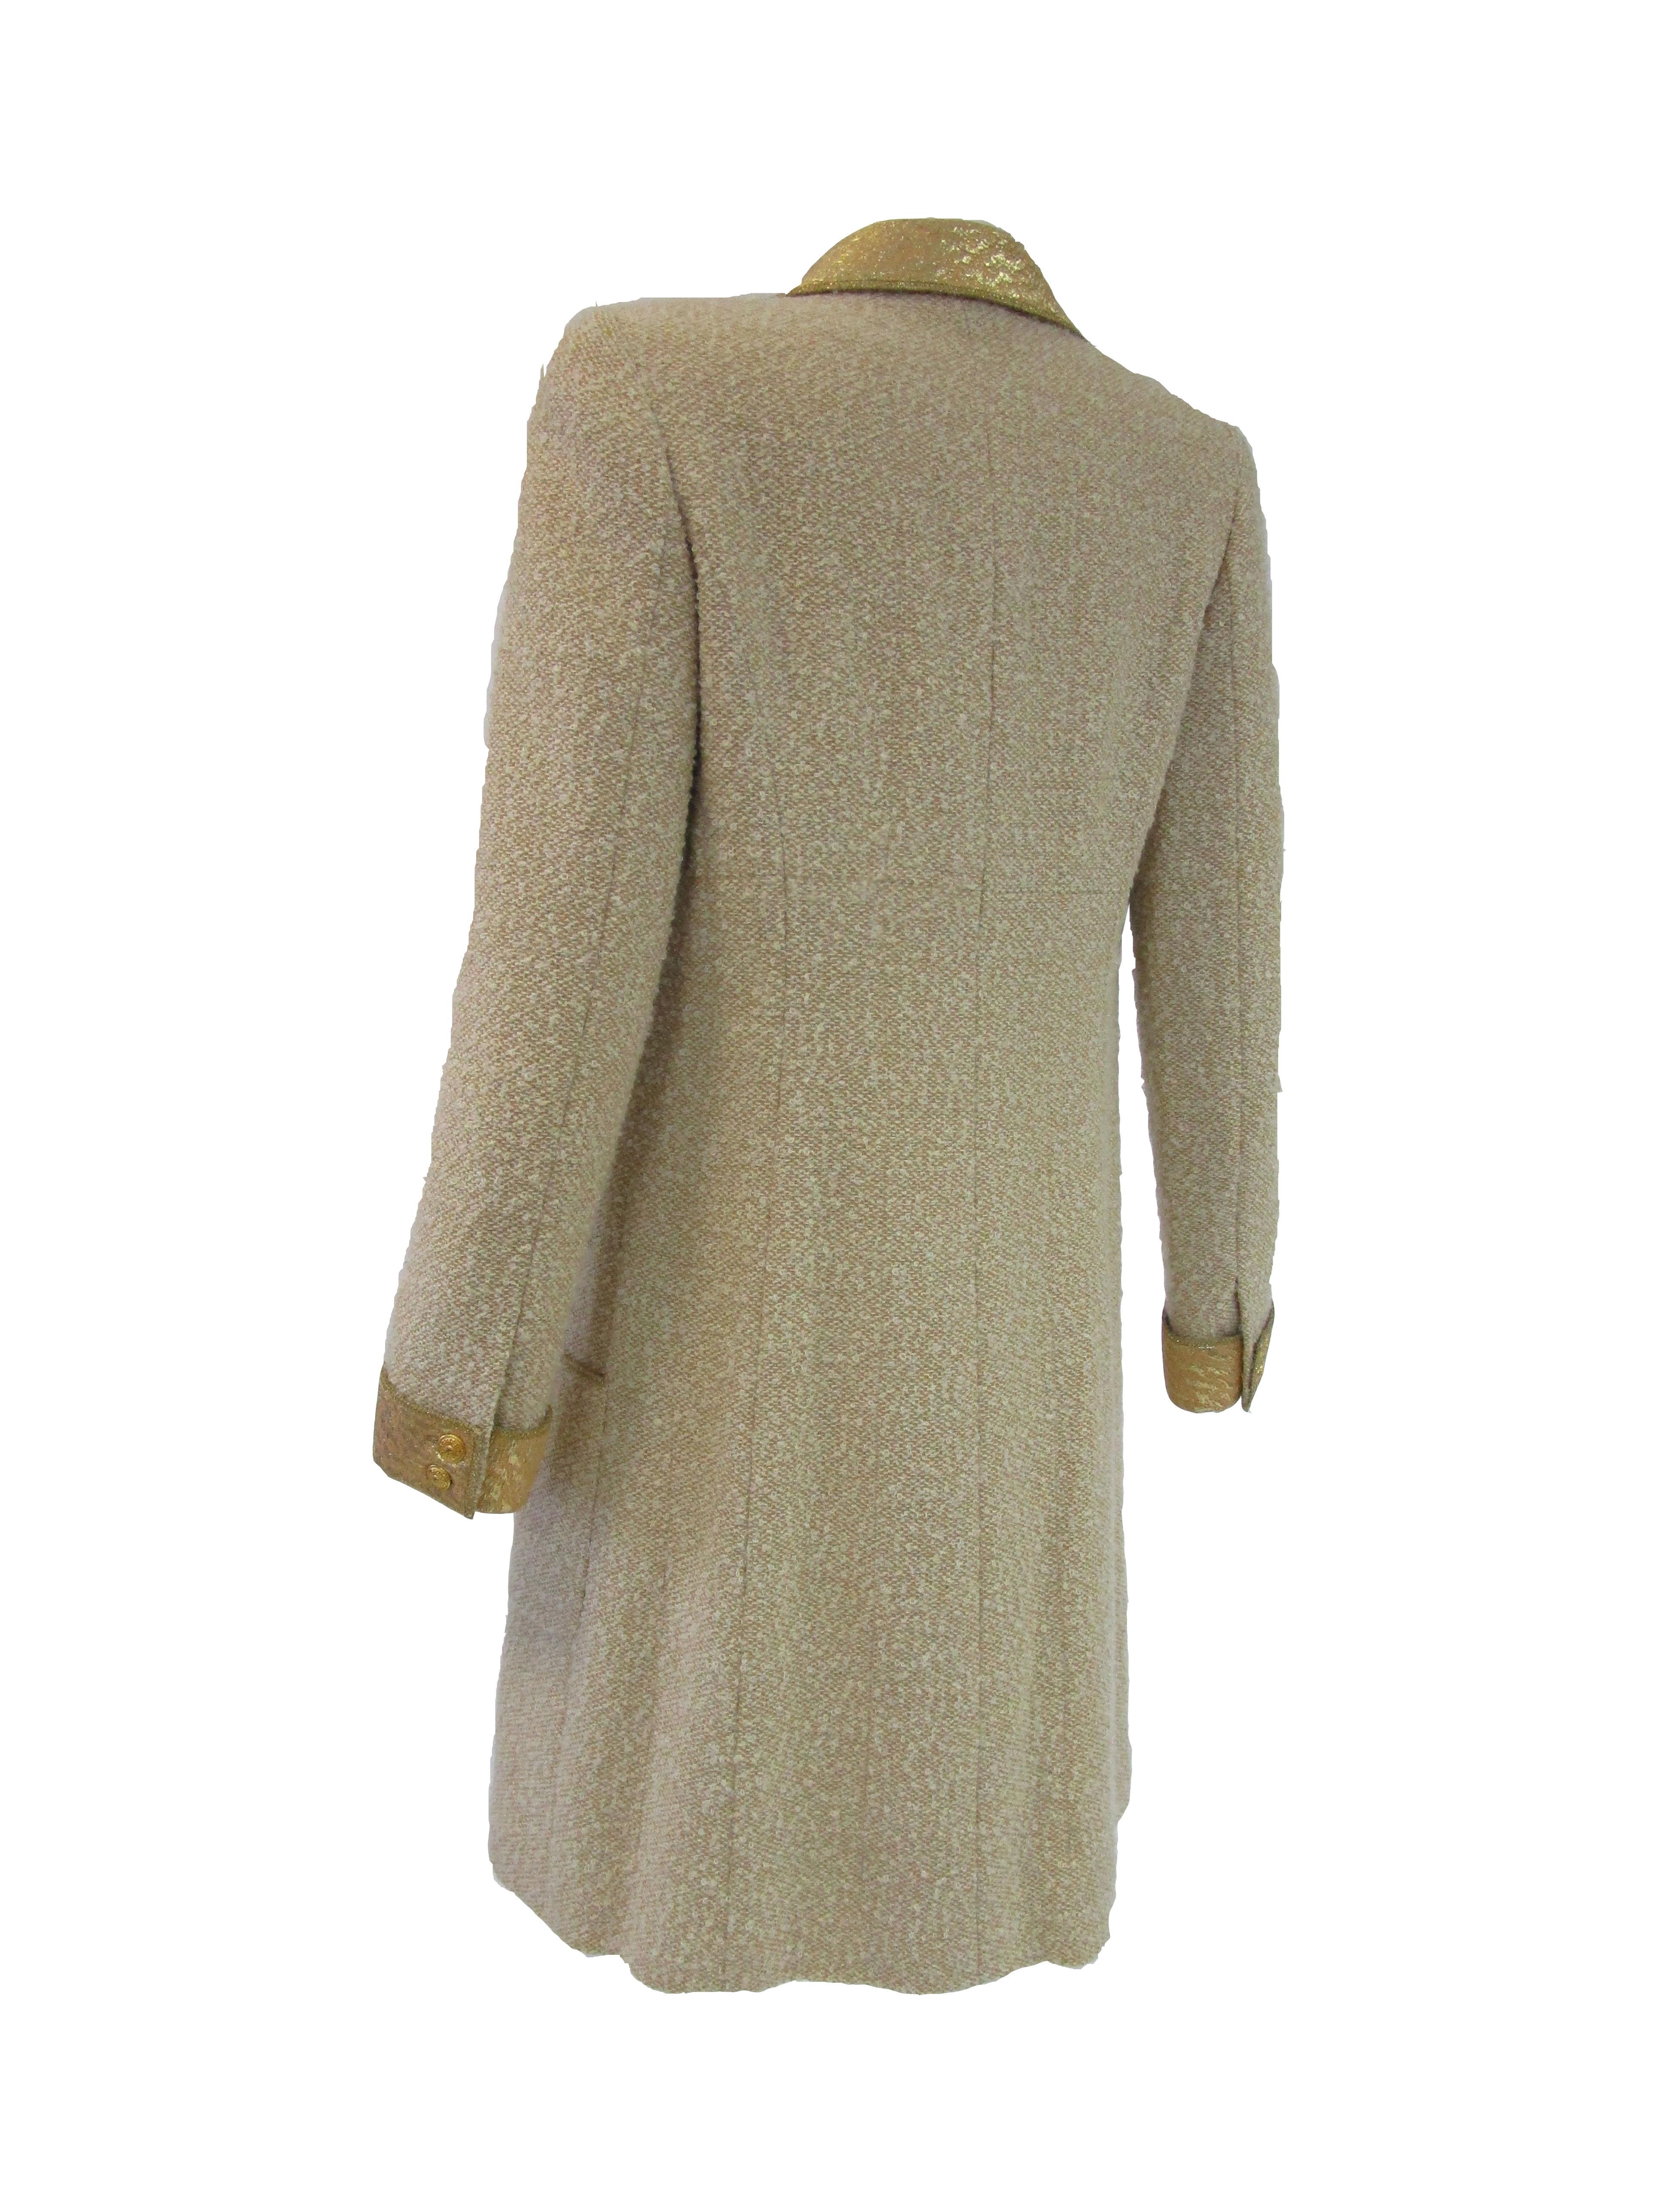 1996 Chanel by Lagerfeld Golden Boucle and Lame Shift Dress and Coat For Sale 6